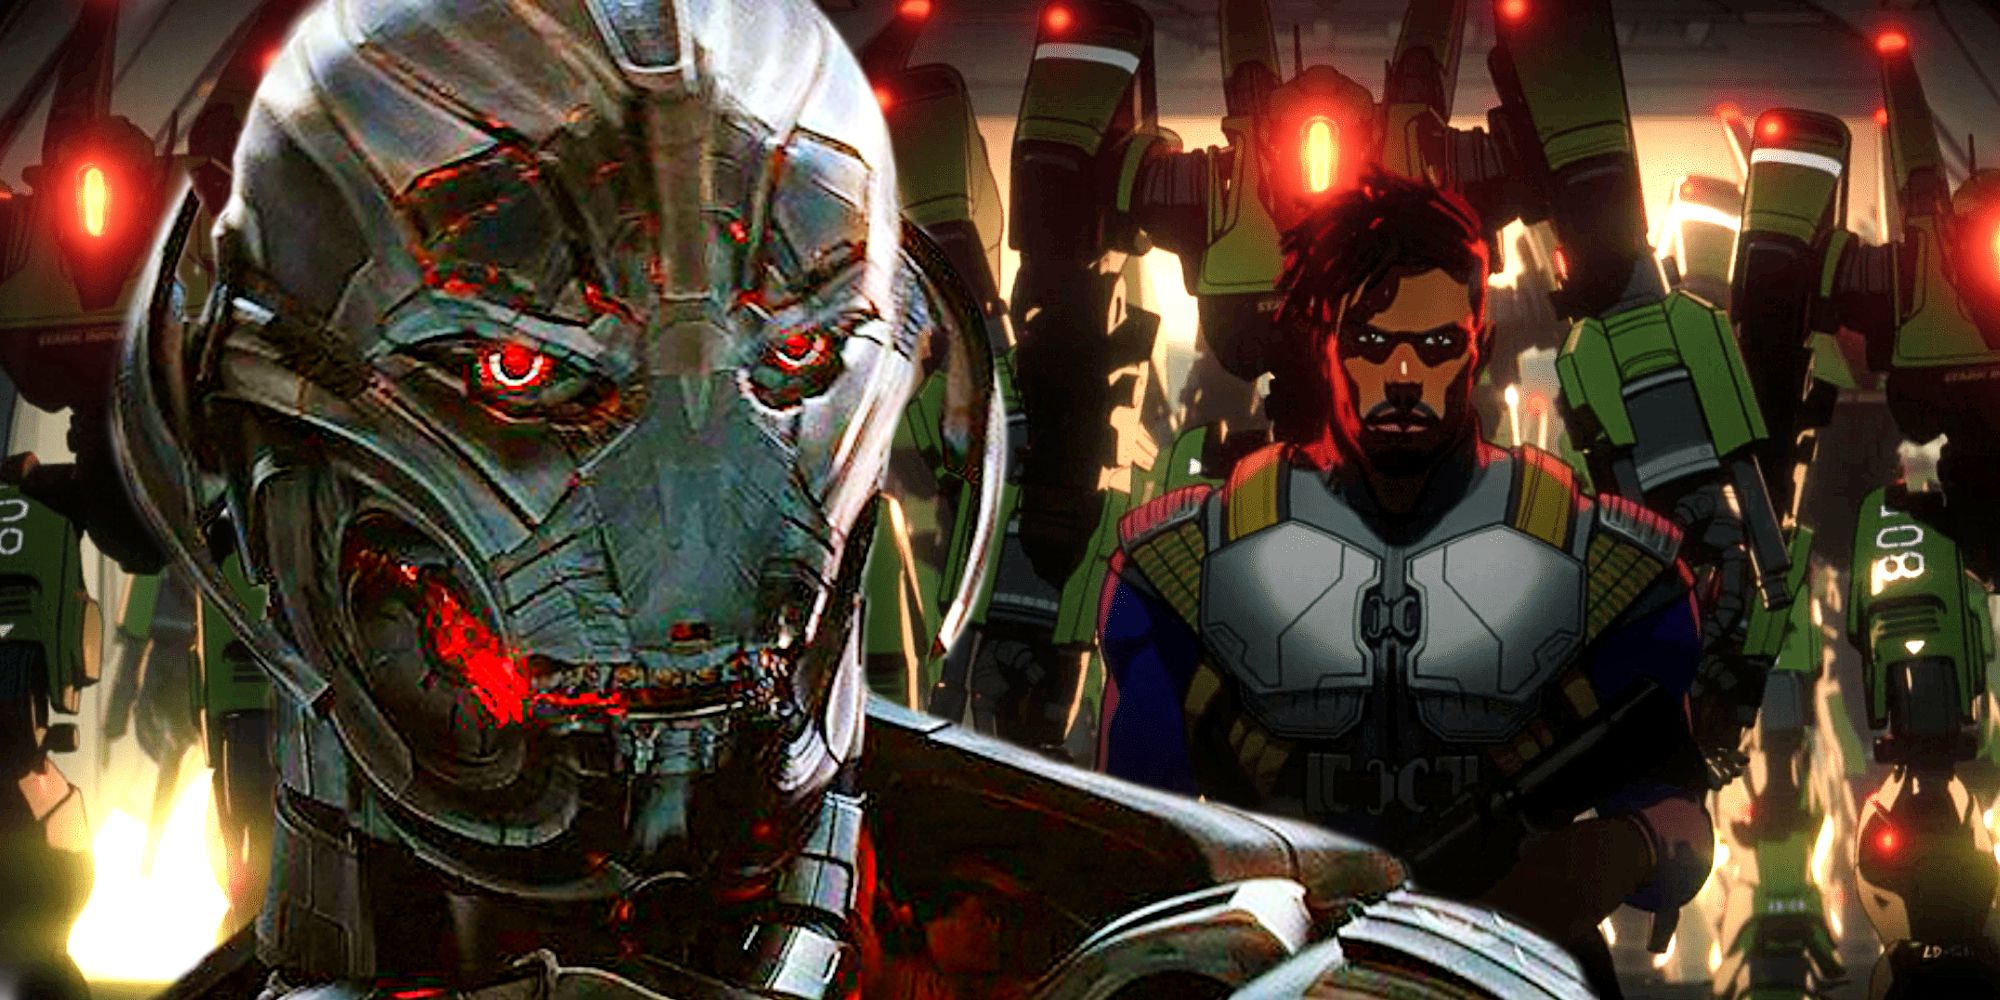 Killmonger Gundam Army in What If Episode 6 and Ultron